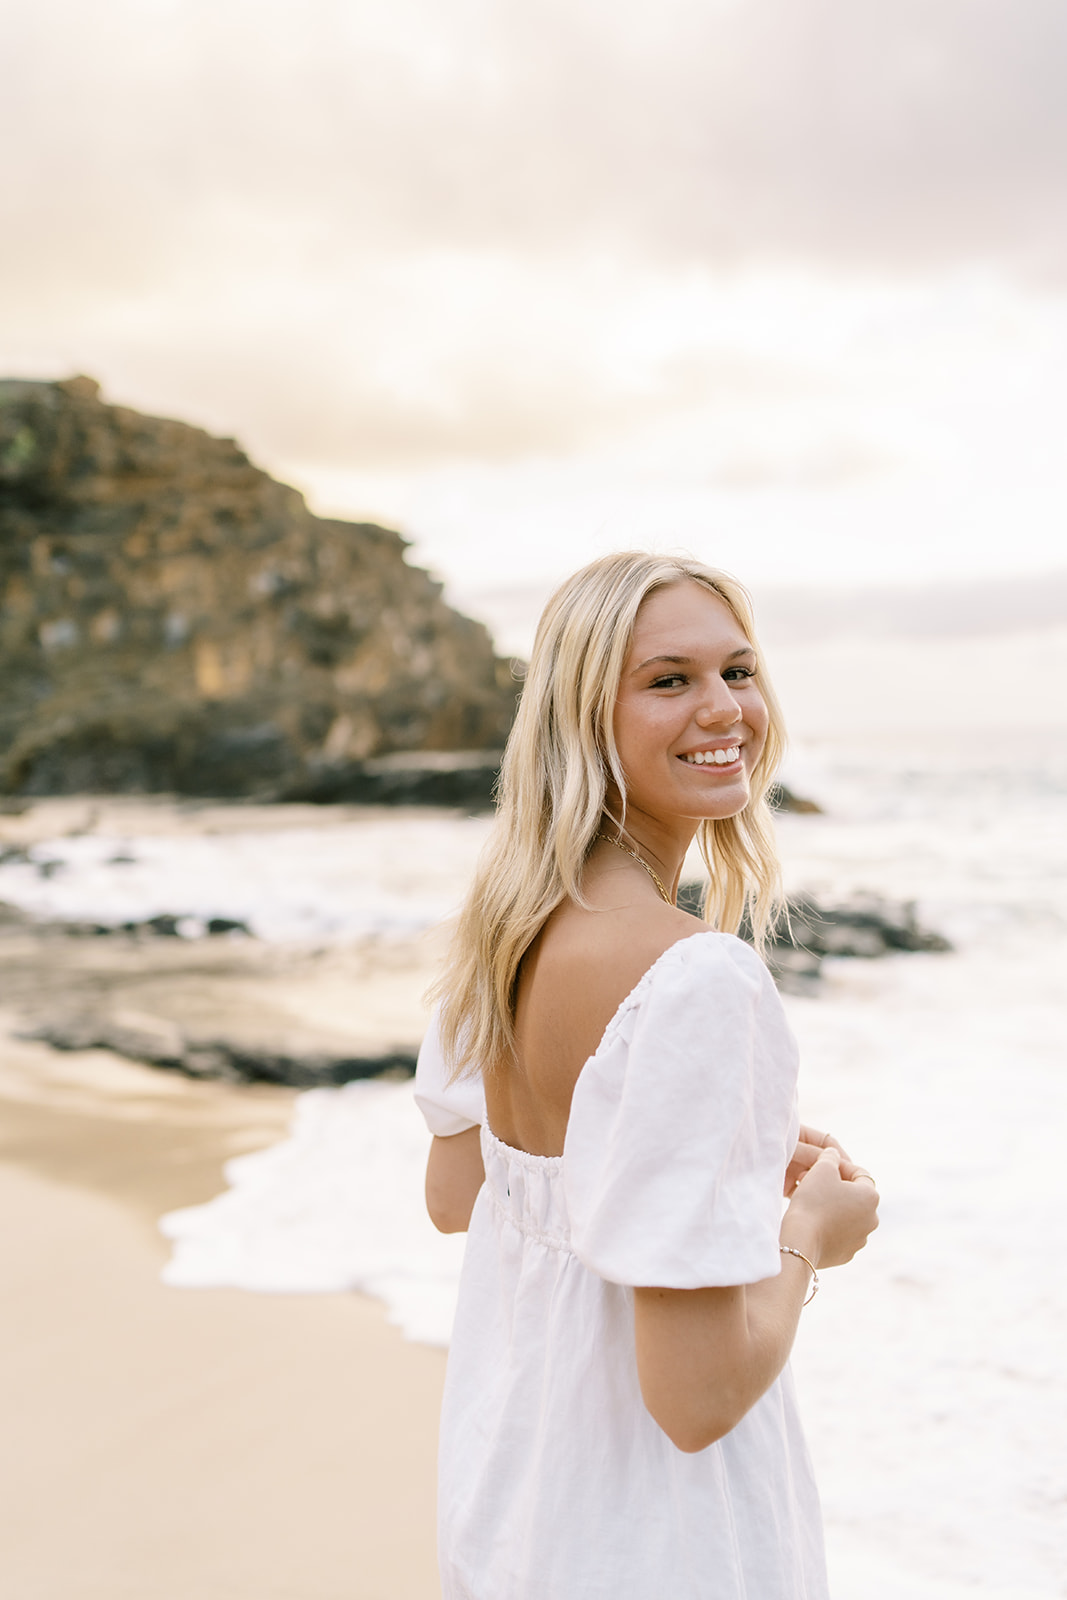 A smiling woman in a white dress standing on a beach with cliffs and the ocean in the background.